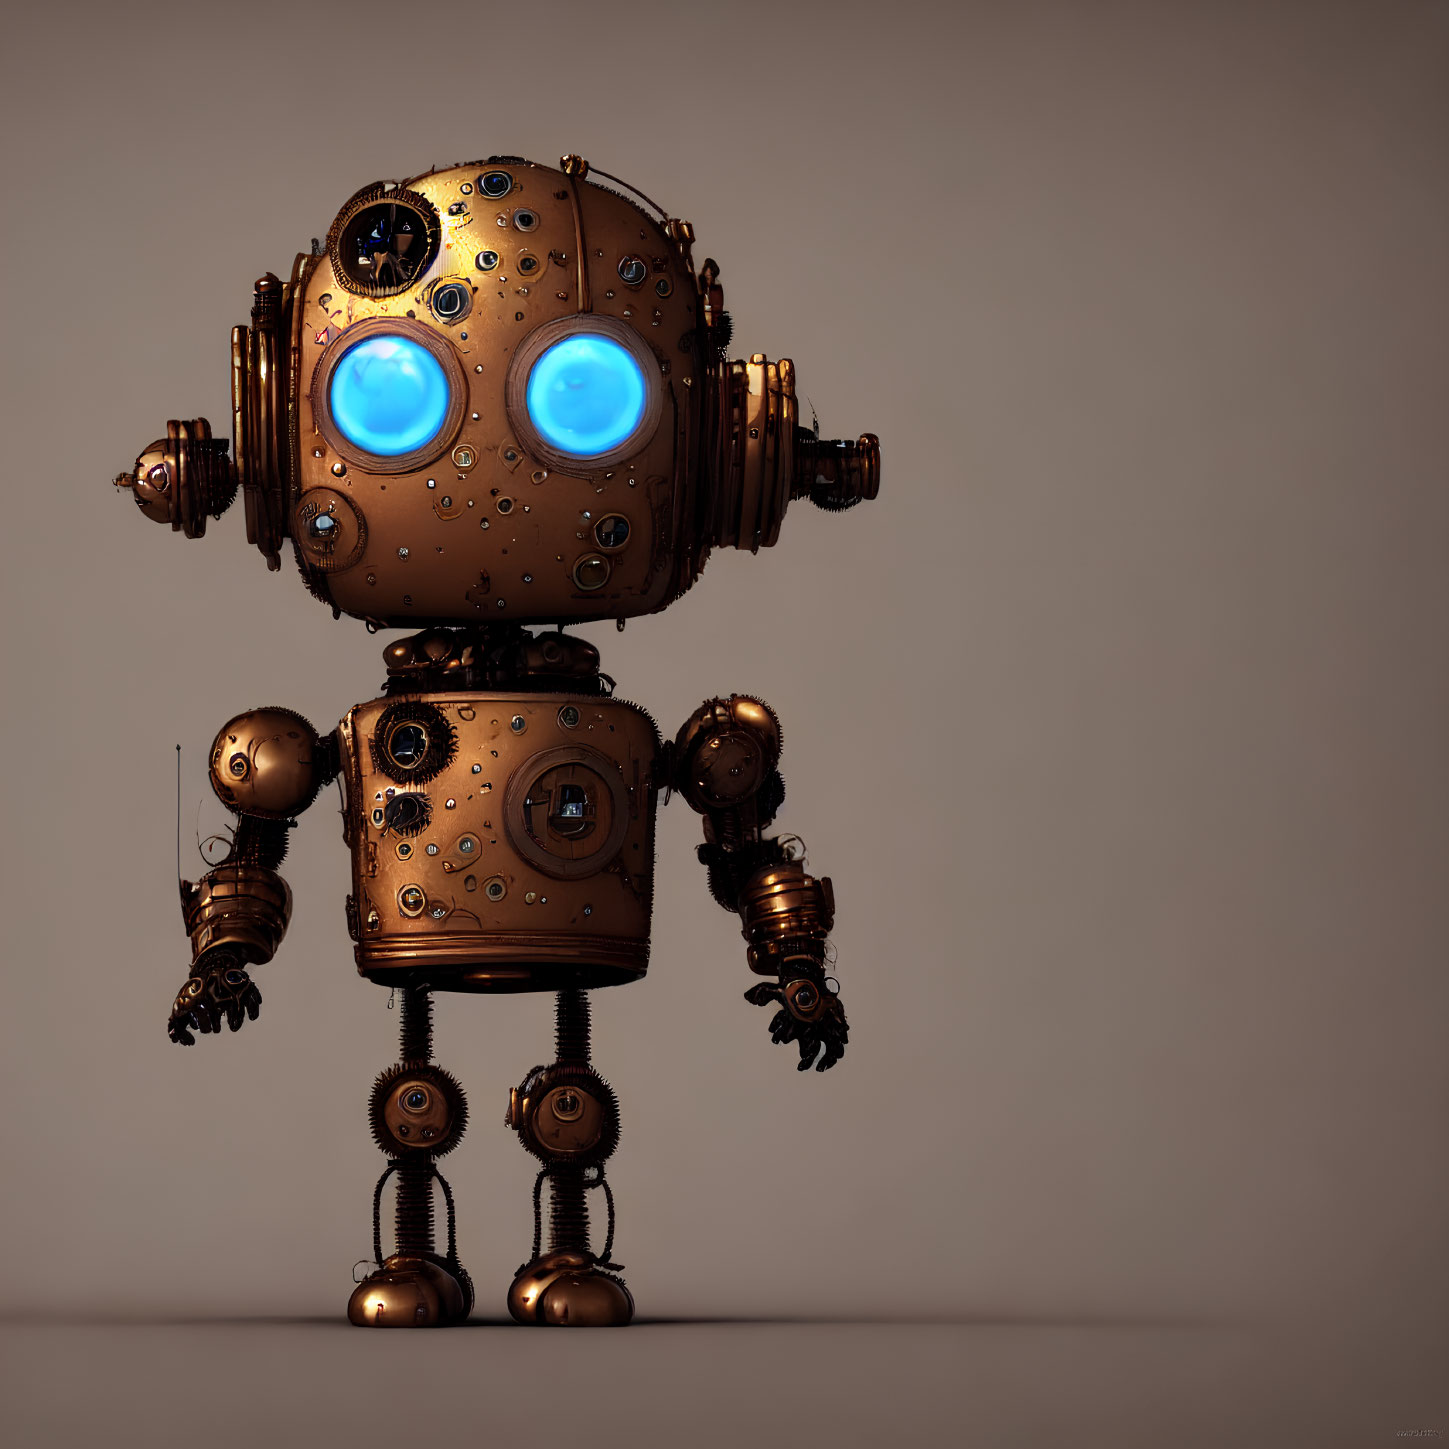 Vintage-Style Robot with Round Body and Glowing Blue Eyes